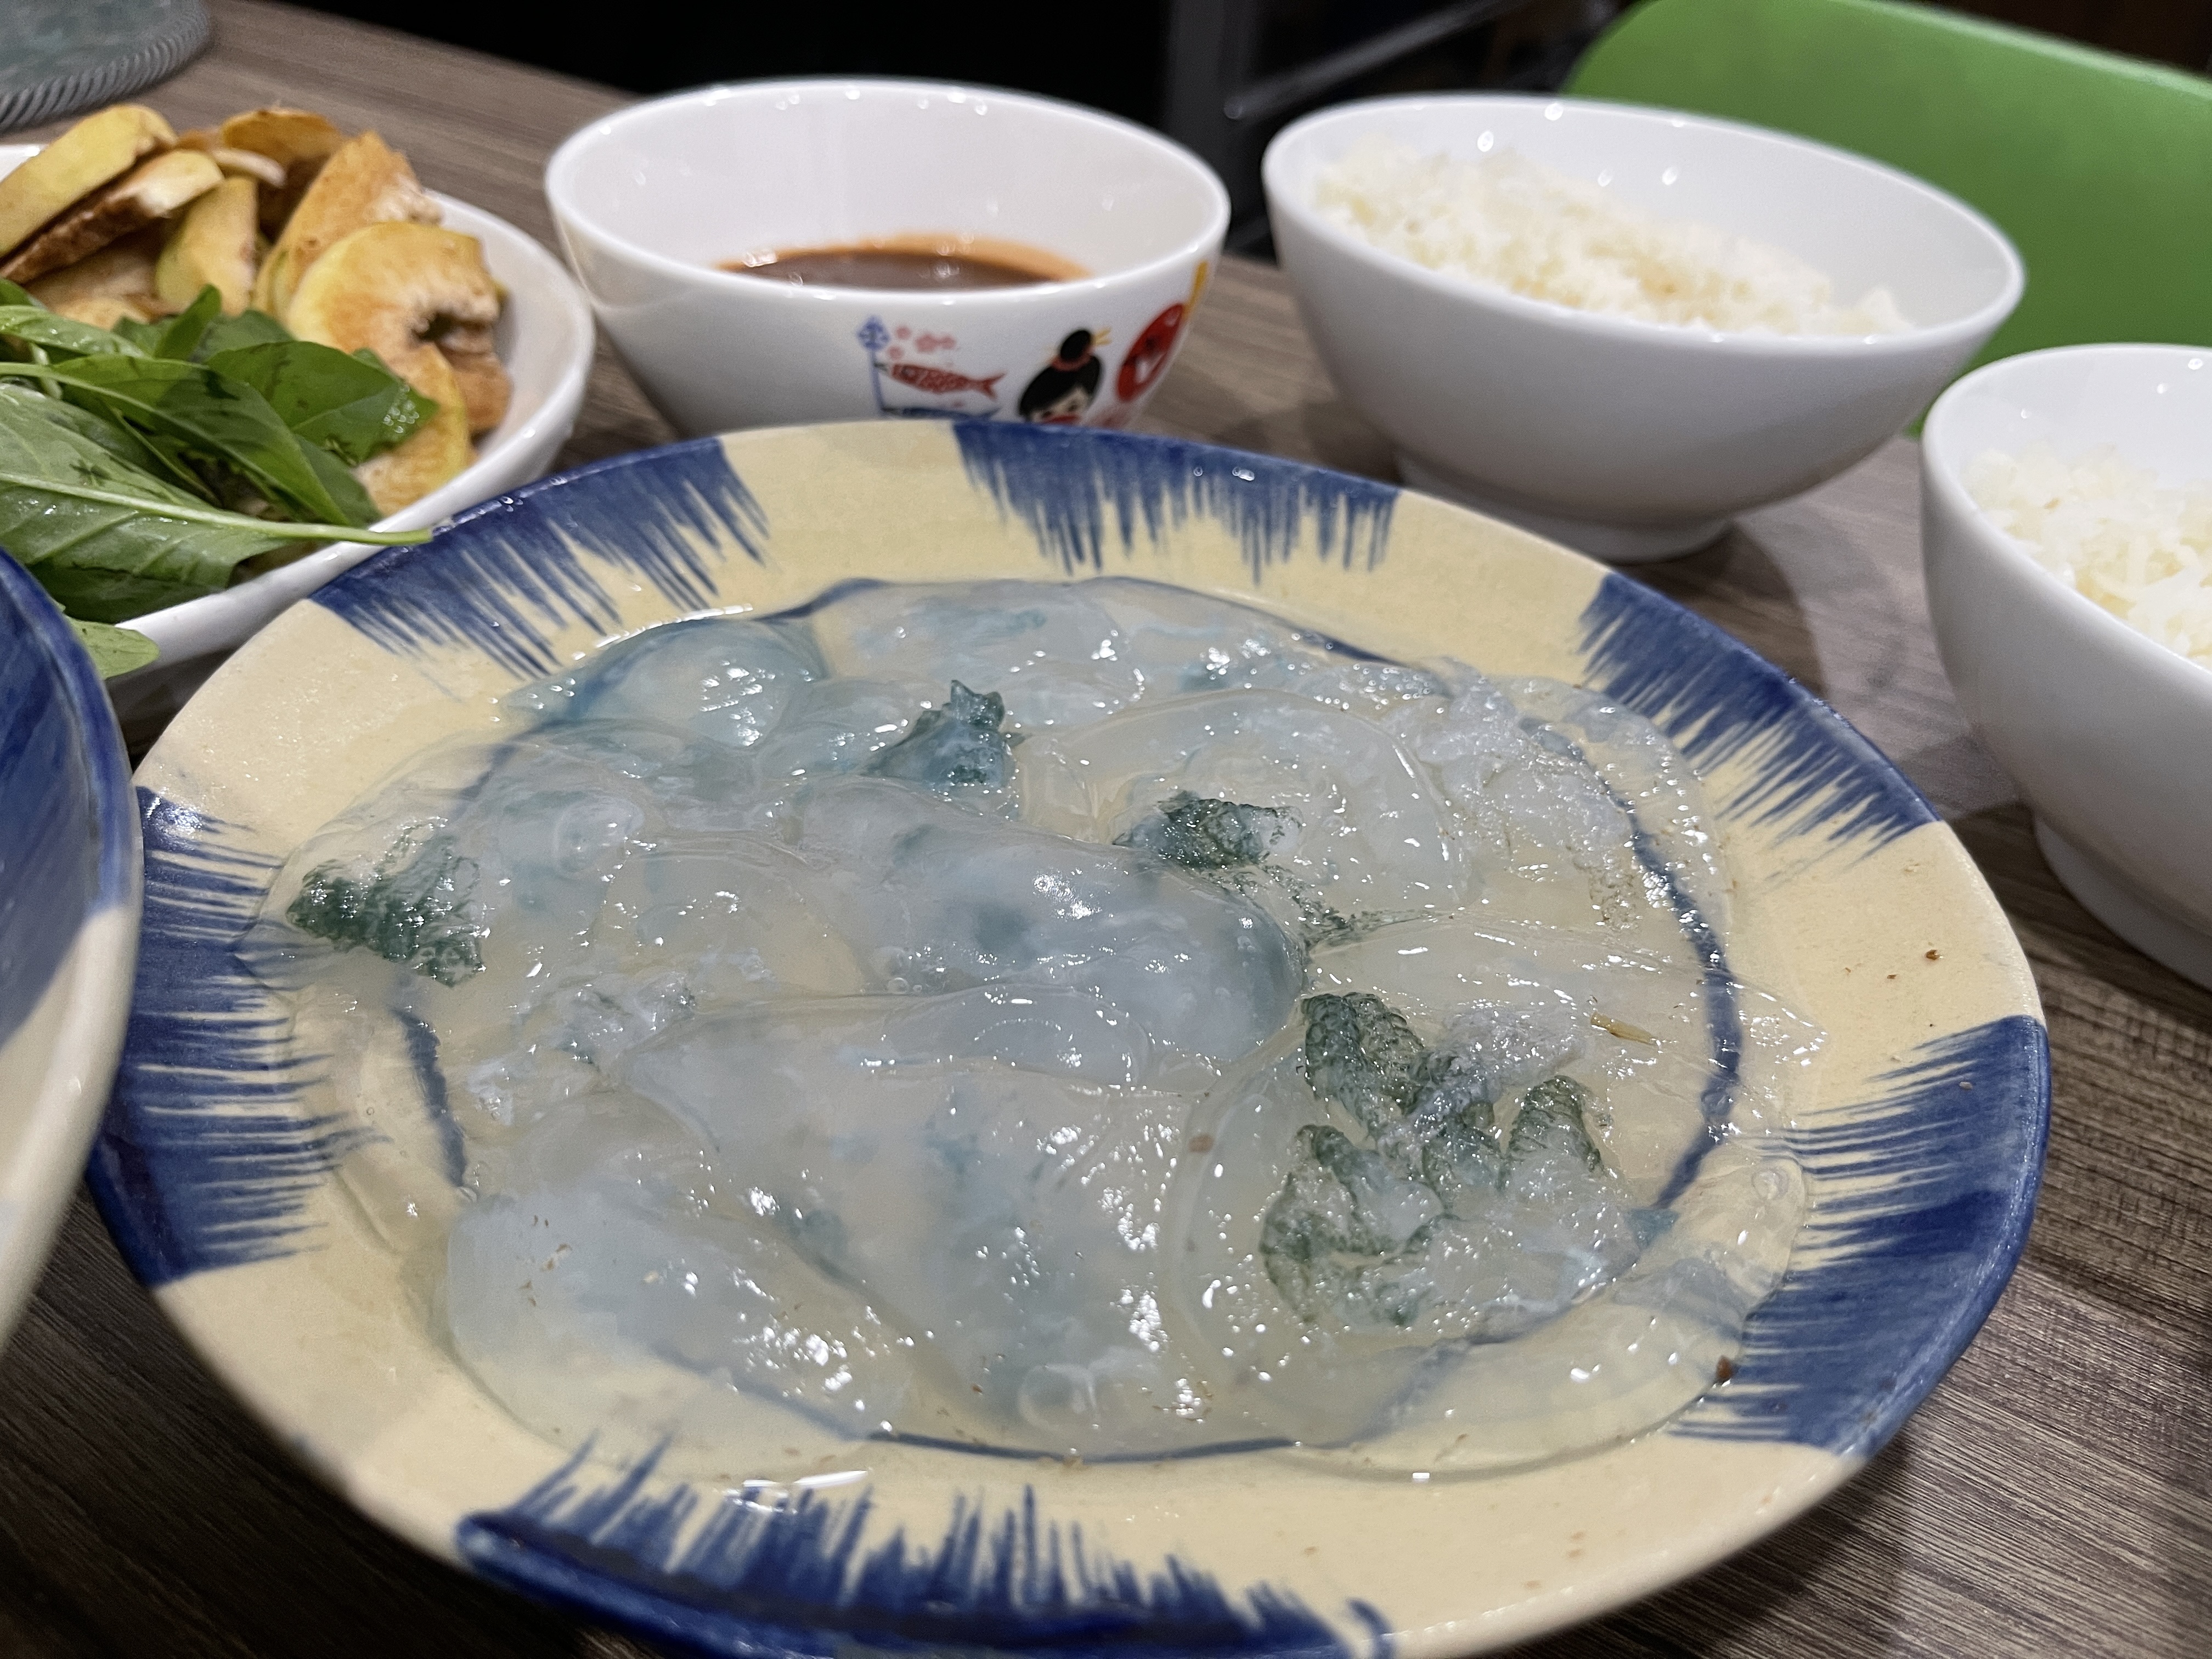 'Con nuốc' (Catostylus townsendi) is served with herbs and green roxburgh at a family meal in Ho Chi Minh City. Photo: Dong Nguyen / Tuoi Tre News